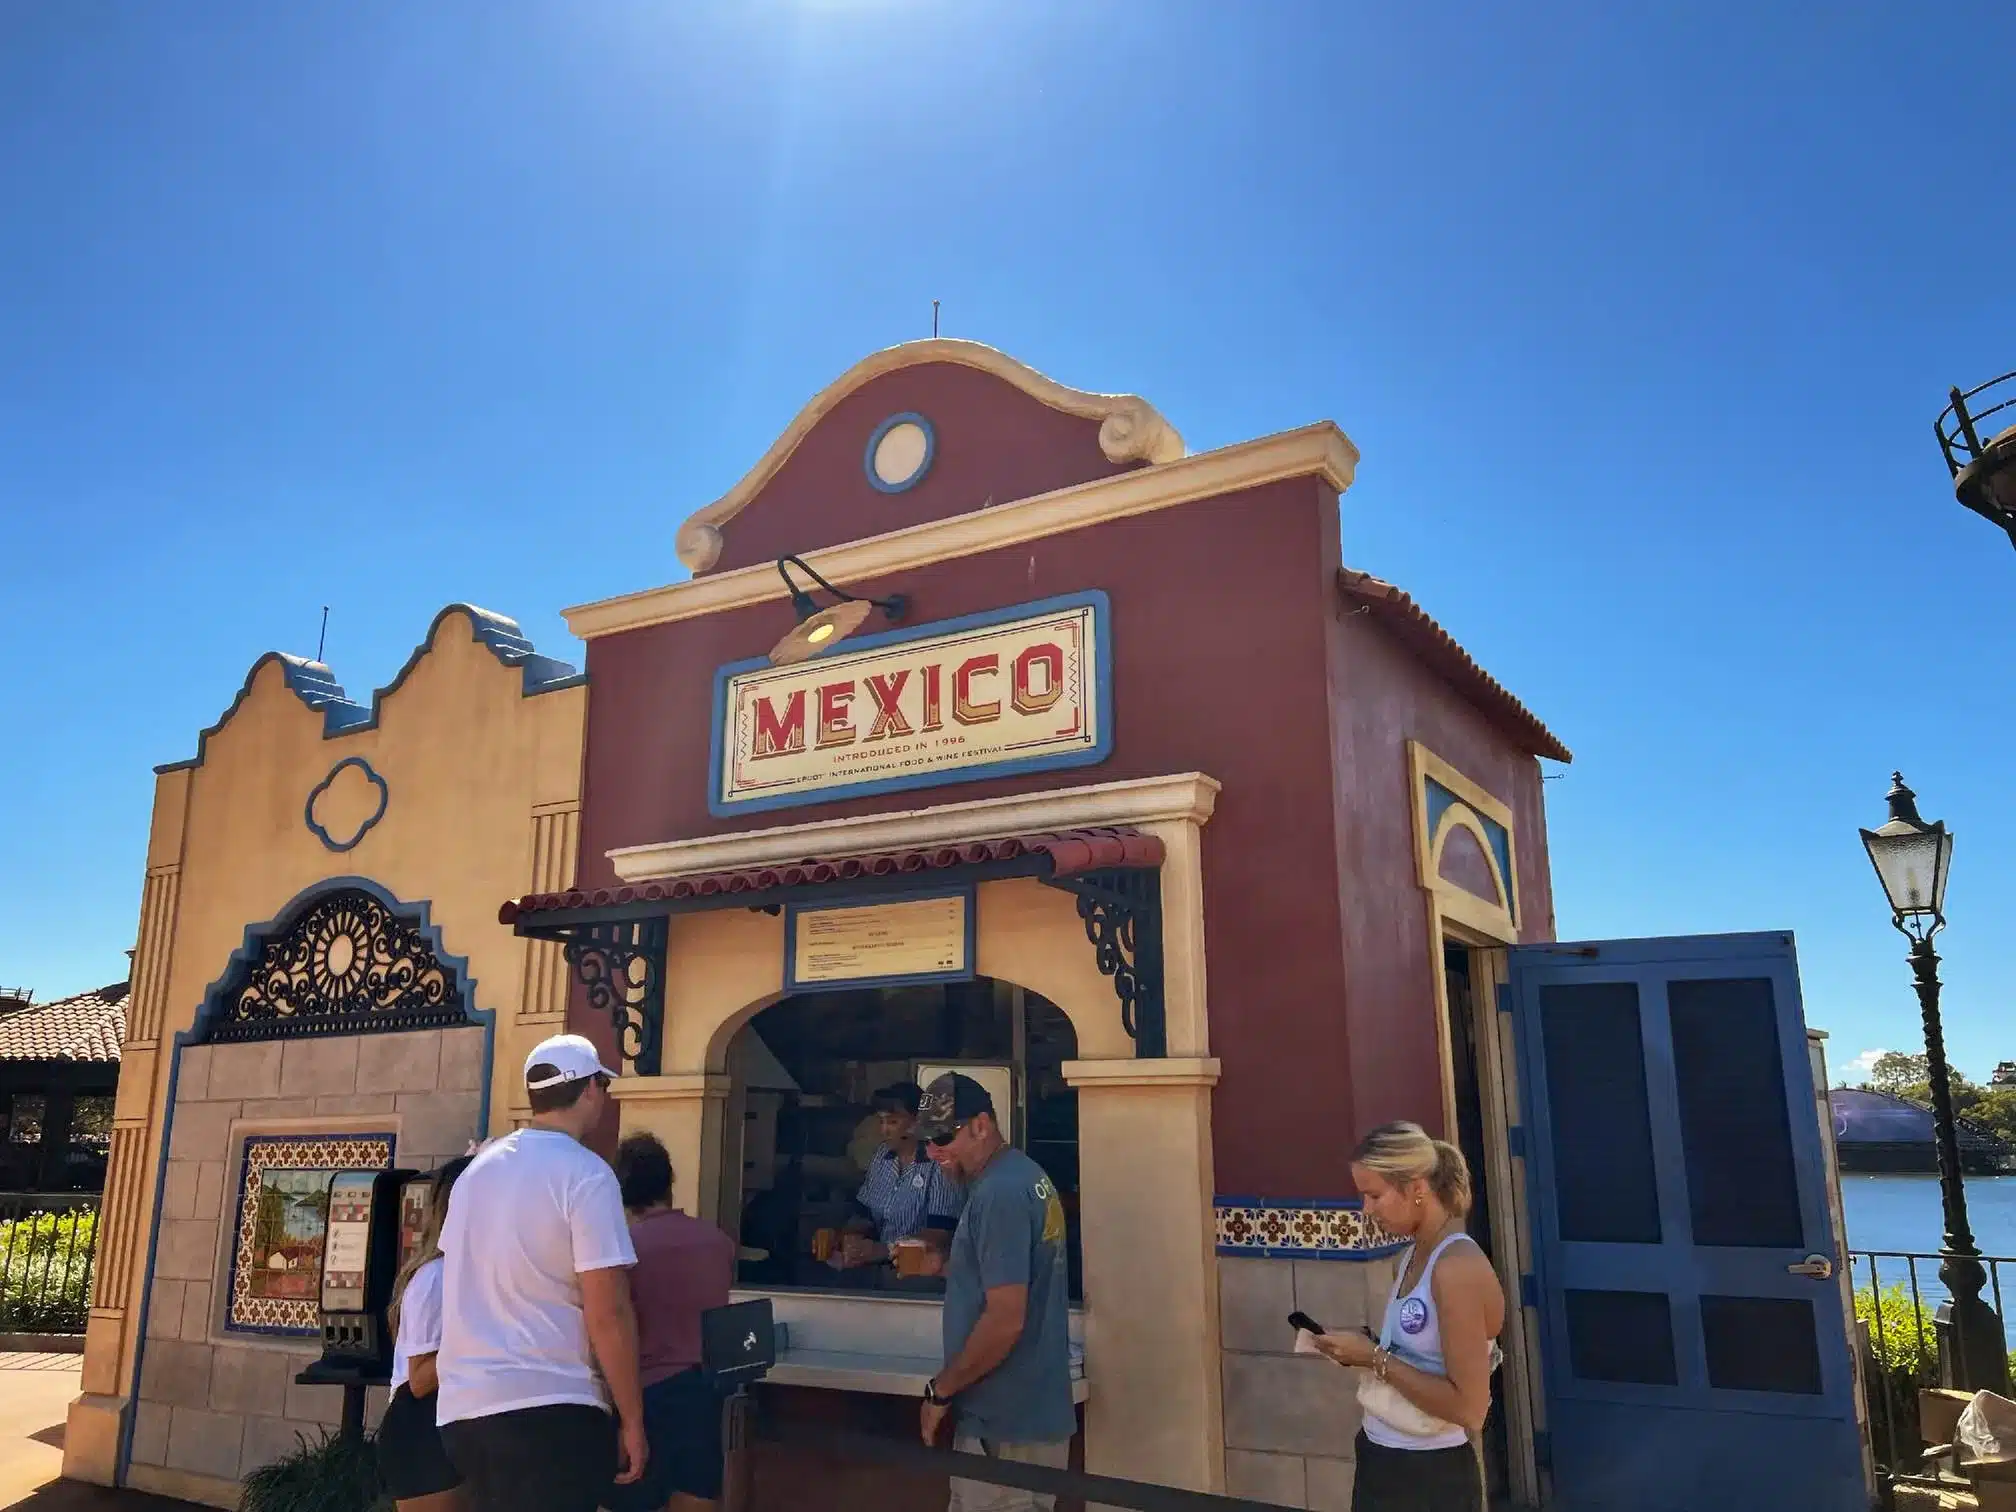 Mexico Food Booth - EPCOT Food and Wine Festival Guide - Guide2WDW